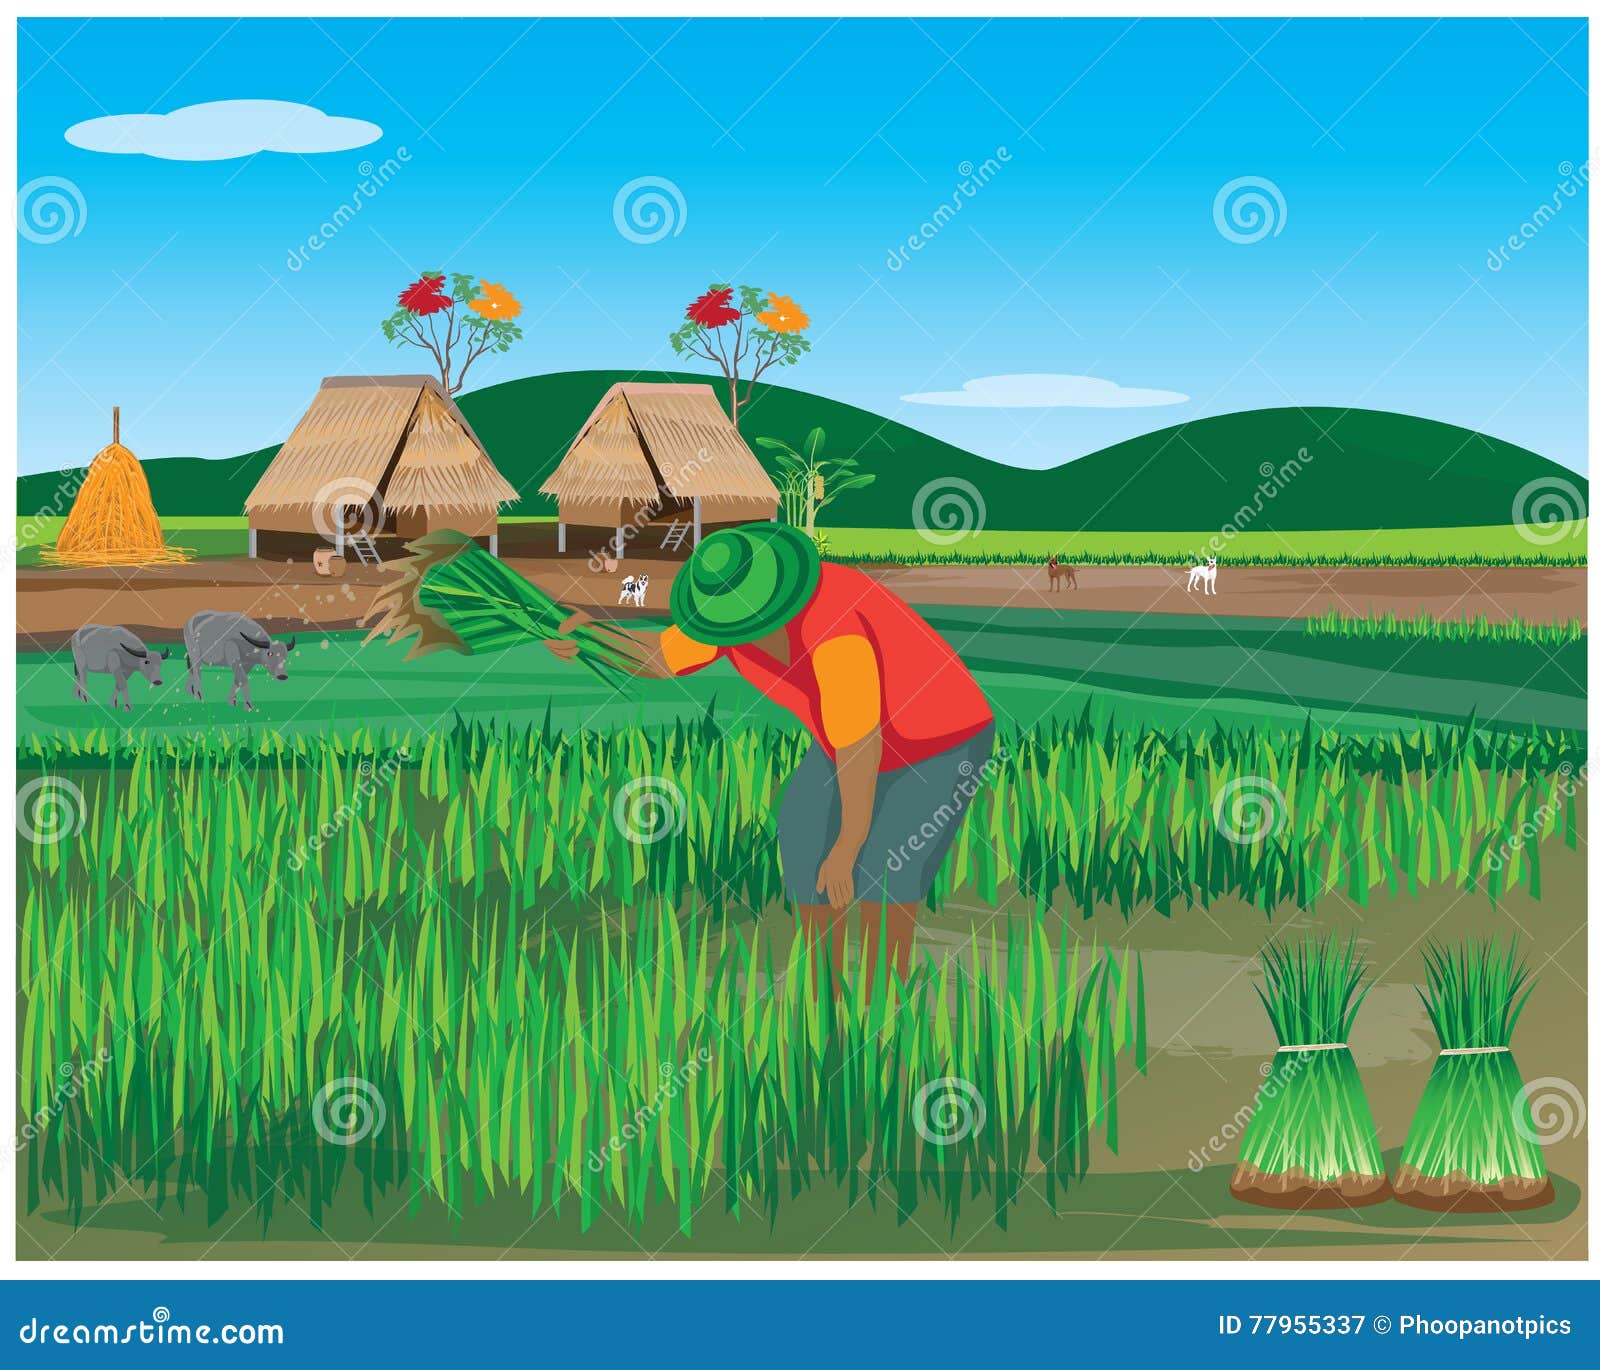 1,185 Paddy Field Drawing Images, Stock Photos, 3D objects, & Vectors |  Shutterstock